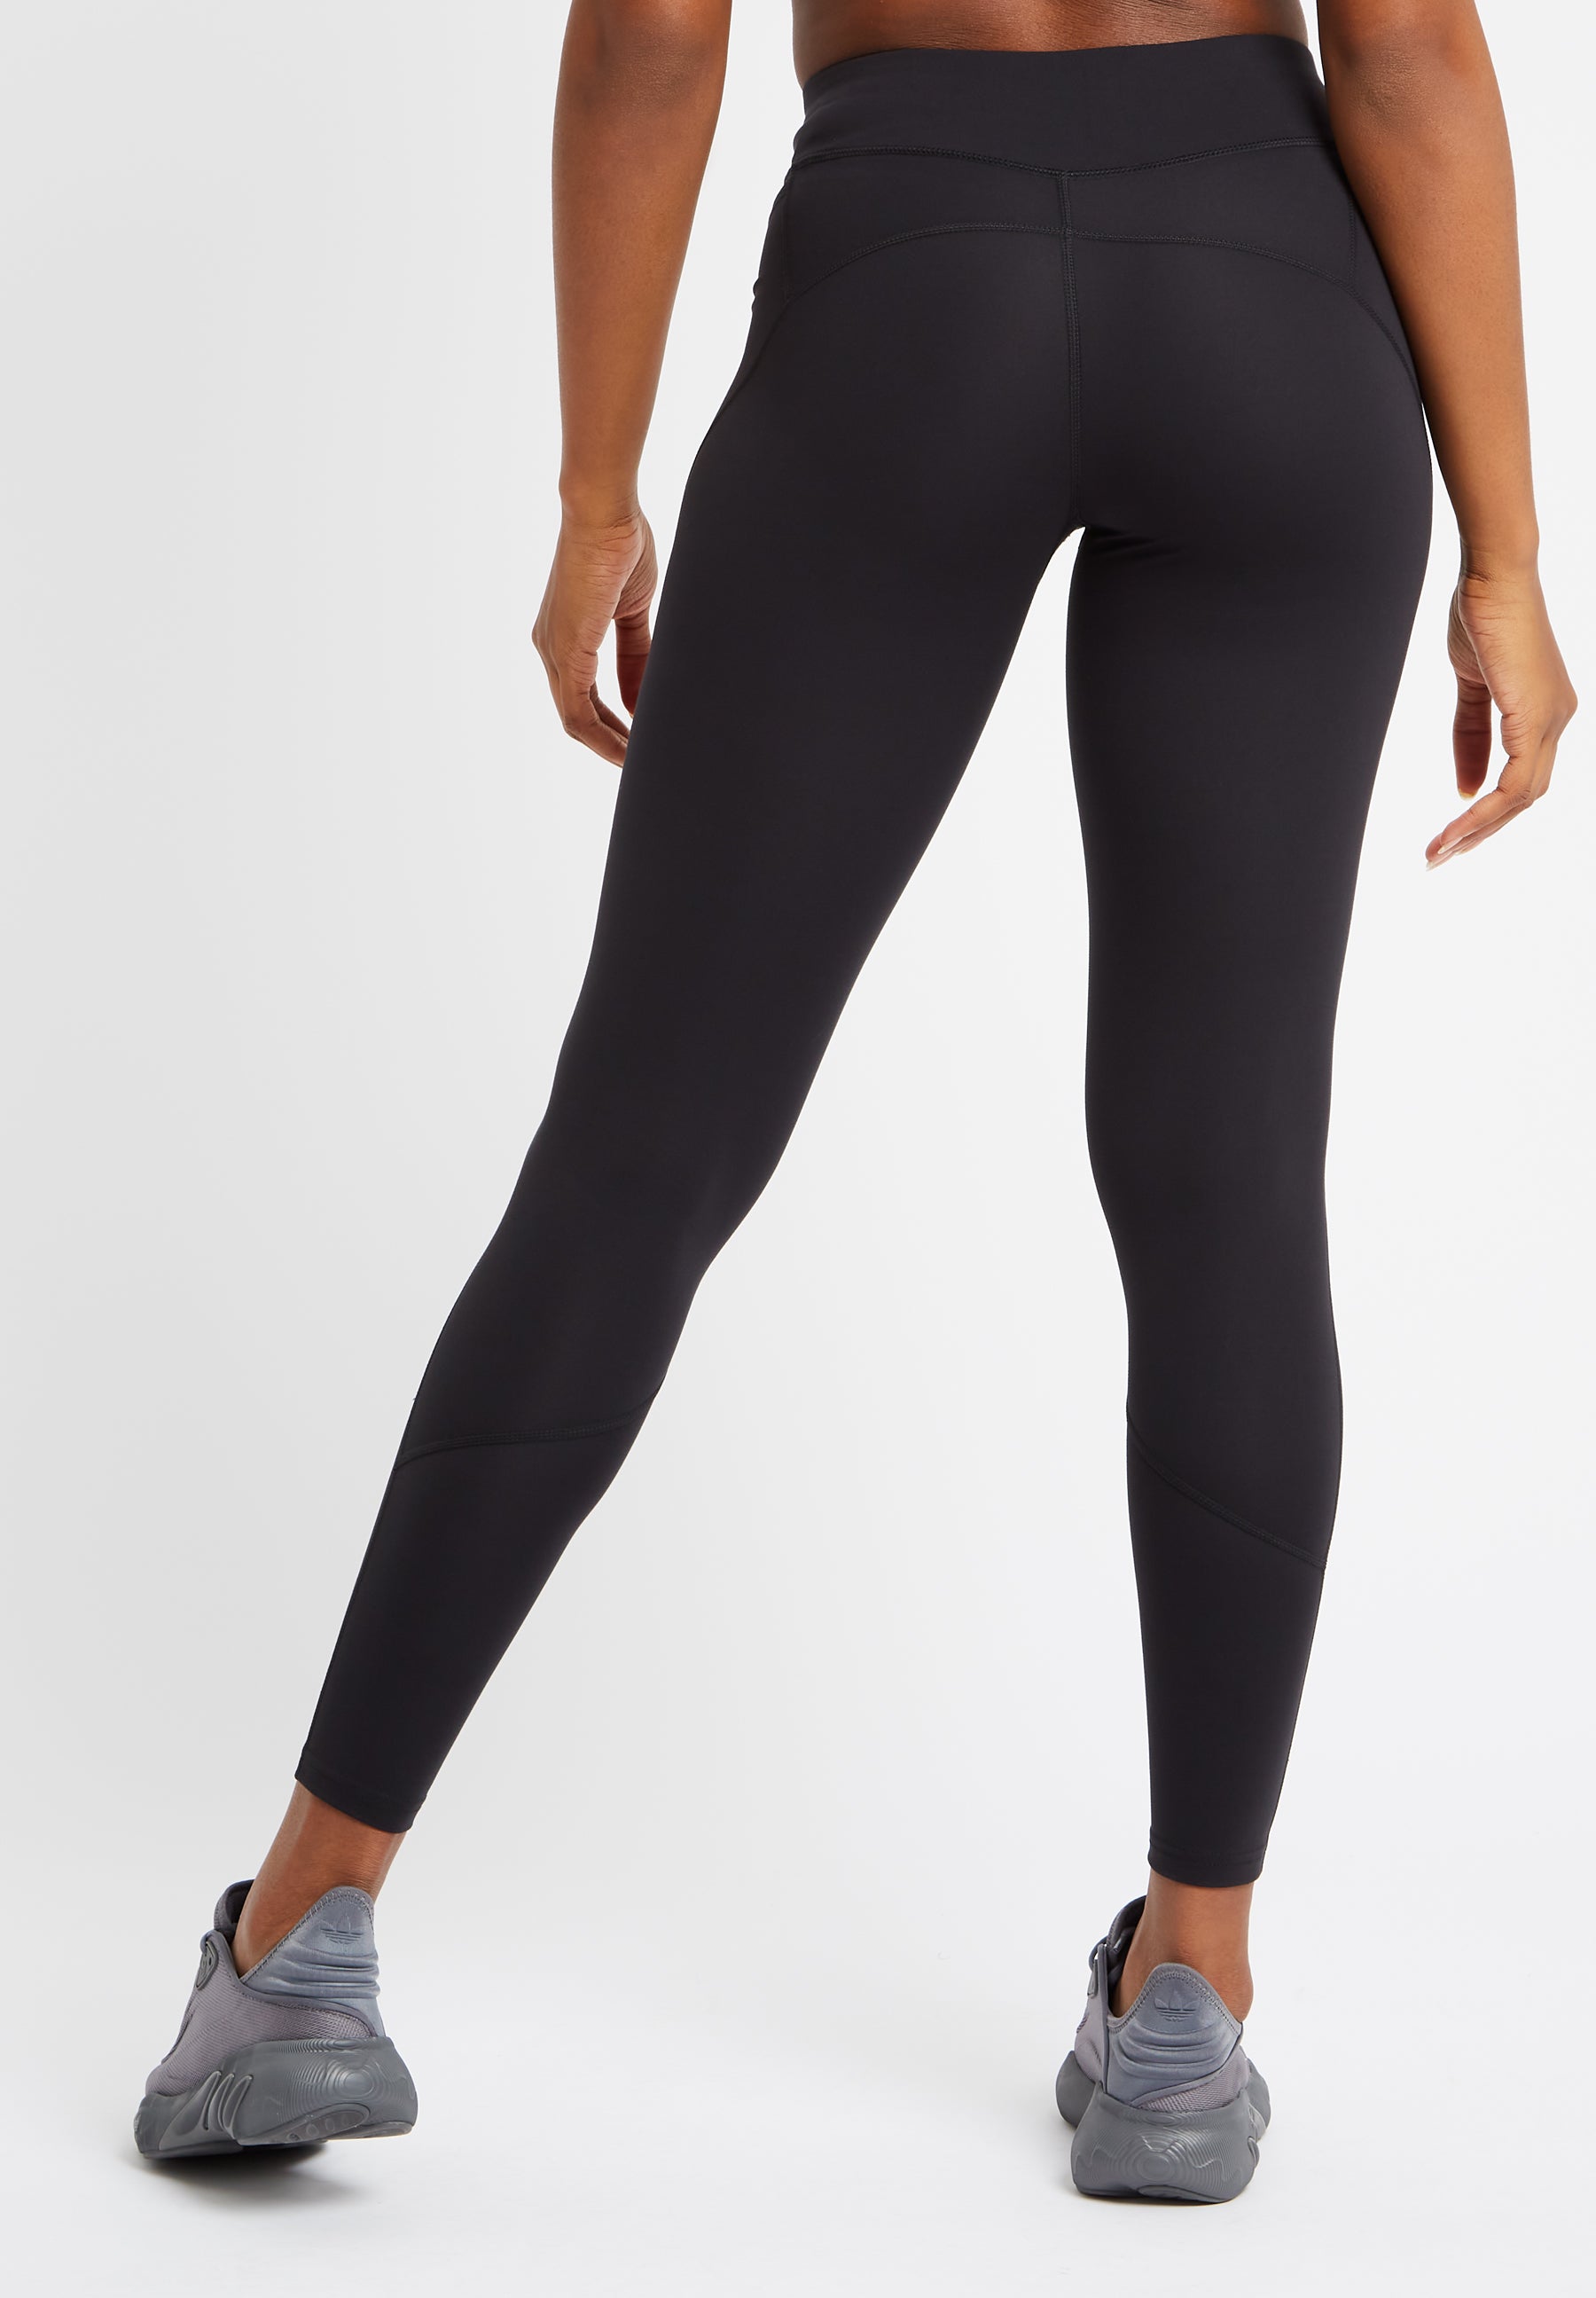 Aoxjox High Waisted Workout Leggings for Women India | Ubuy